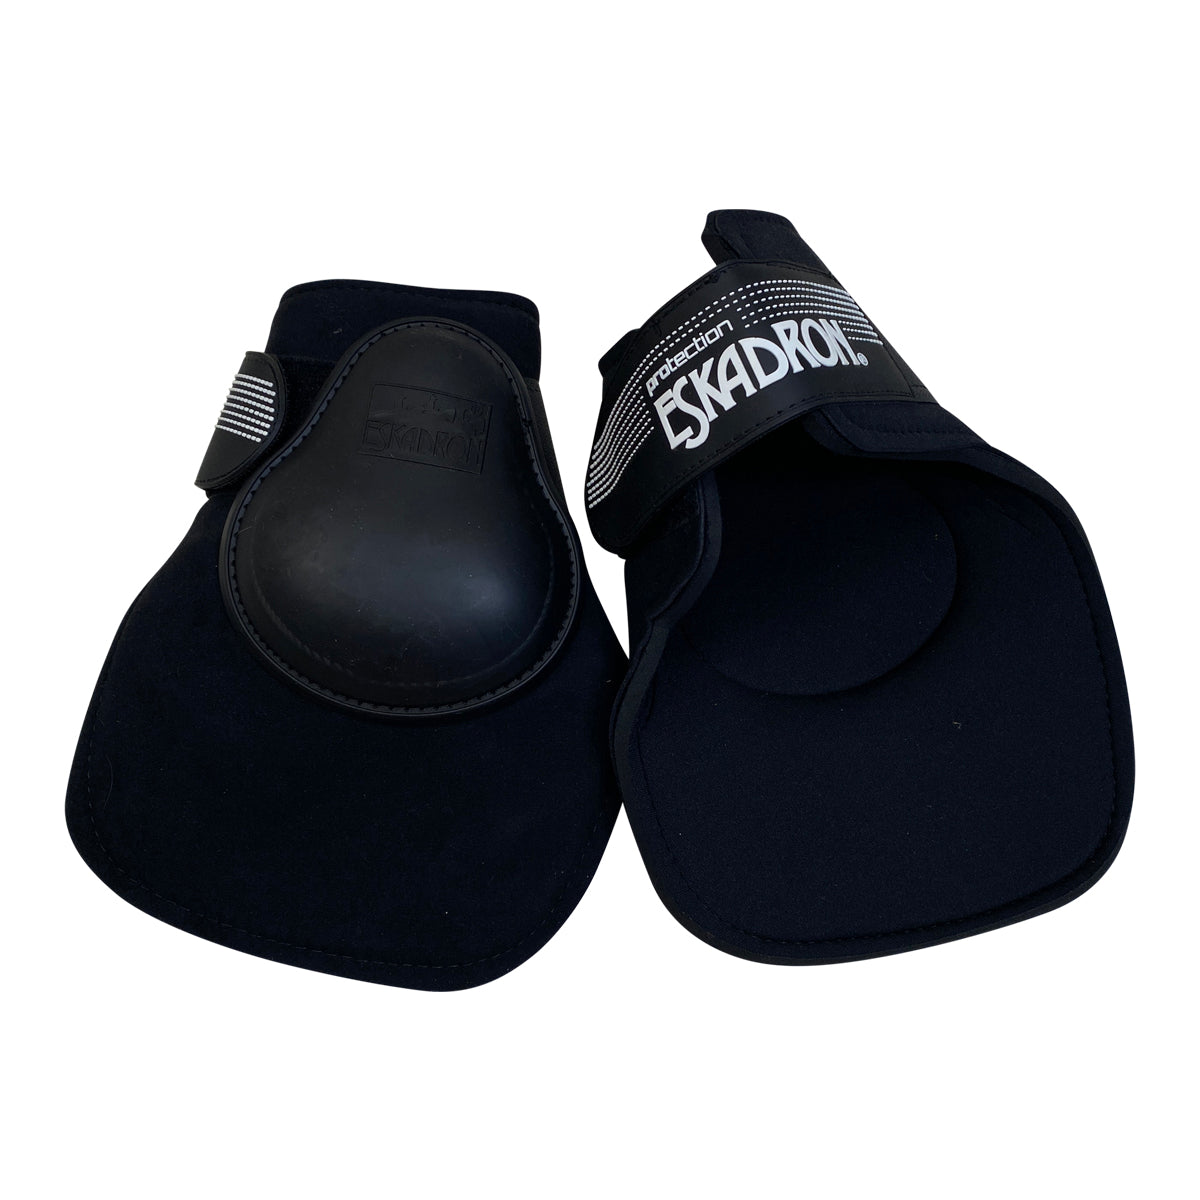 Eskadron Protection 'Special H' Fetlock Boots in Black